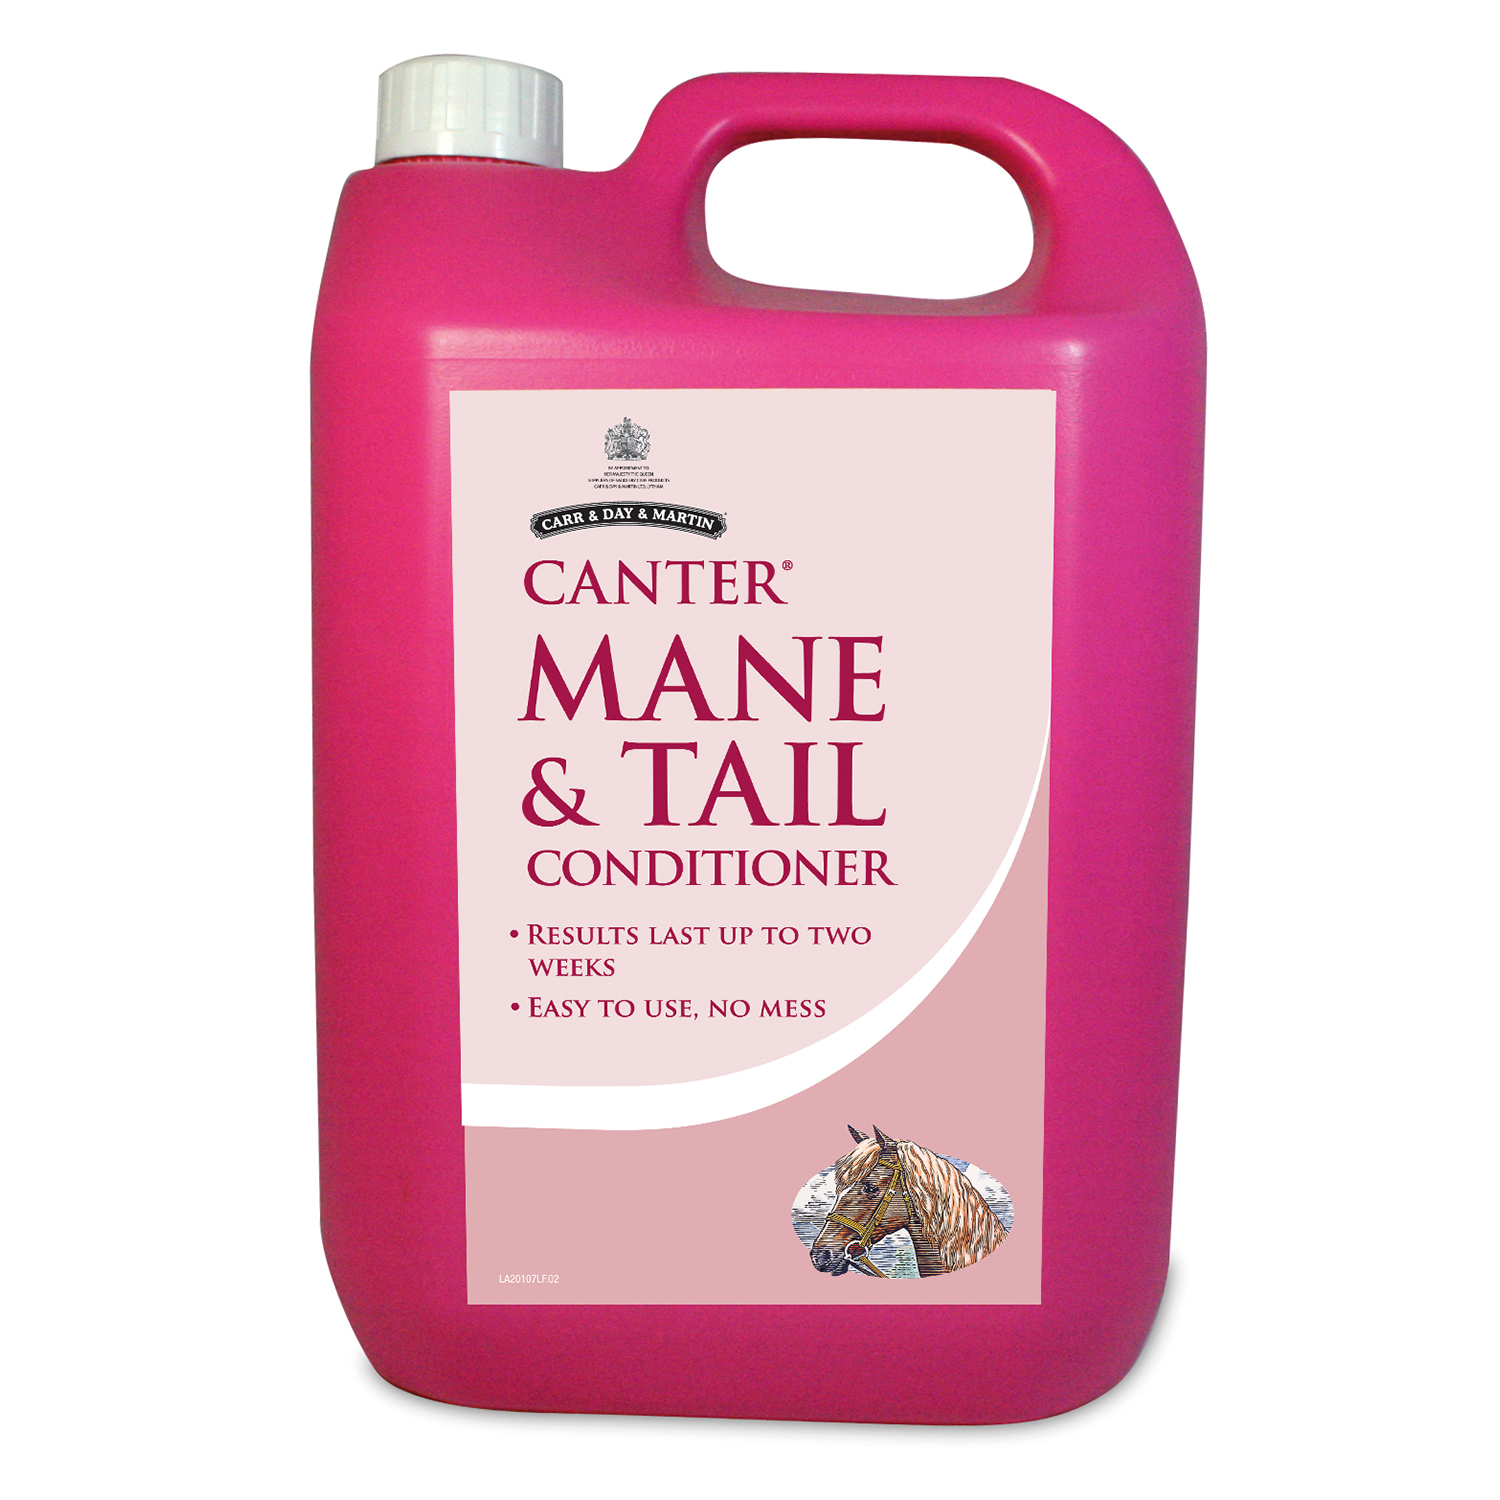 CARR & DAY & MARTIN CANTER MANE & TAIL CONDITIONER 5 LT REFILL 5 LT REFILL